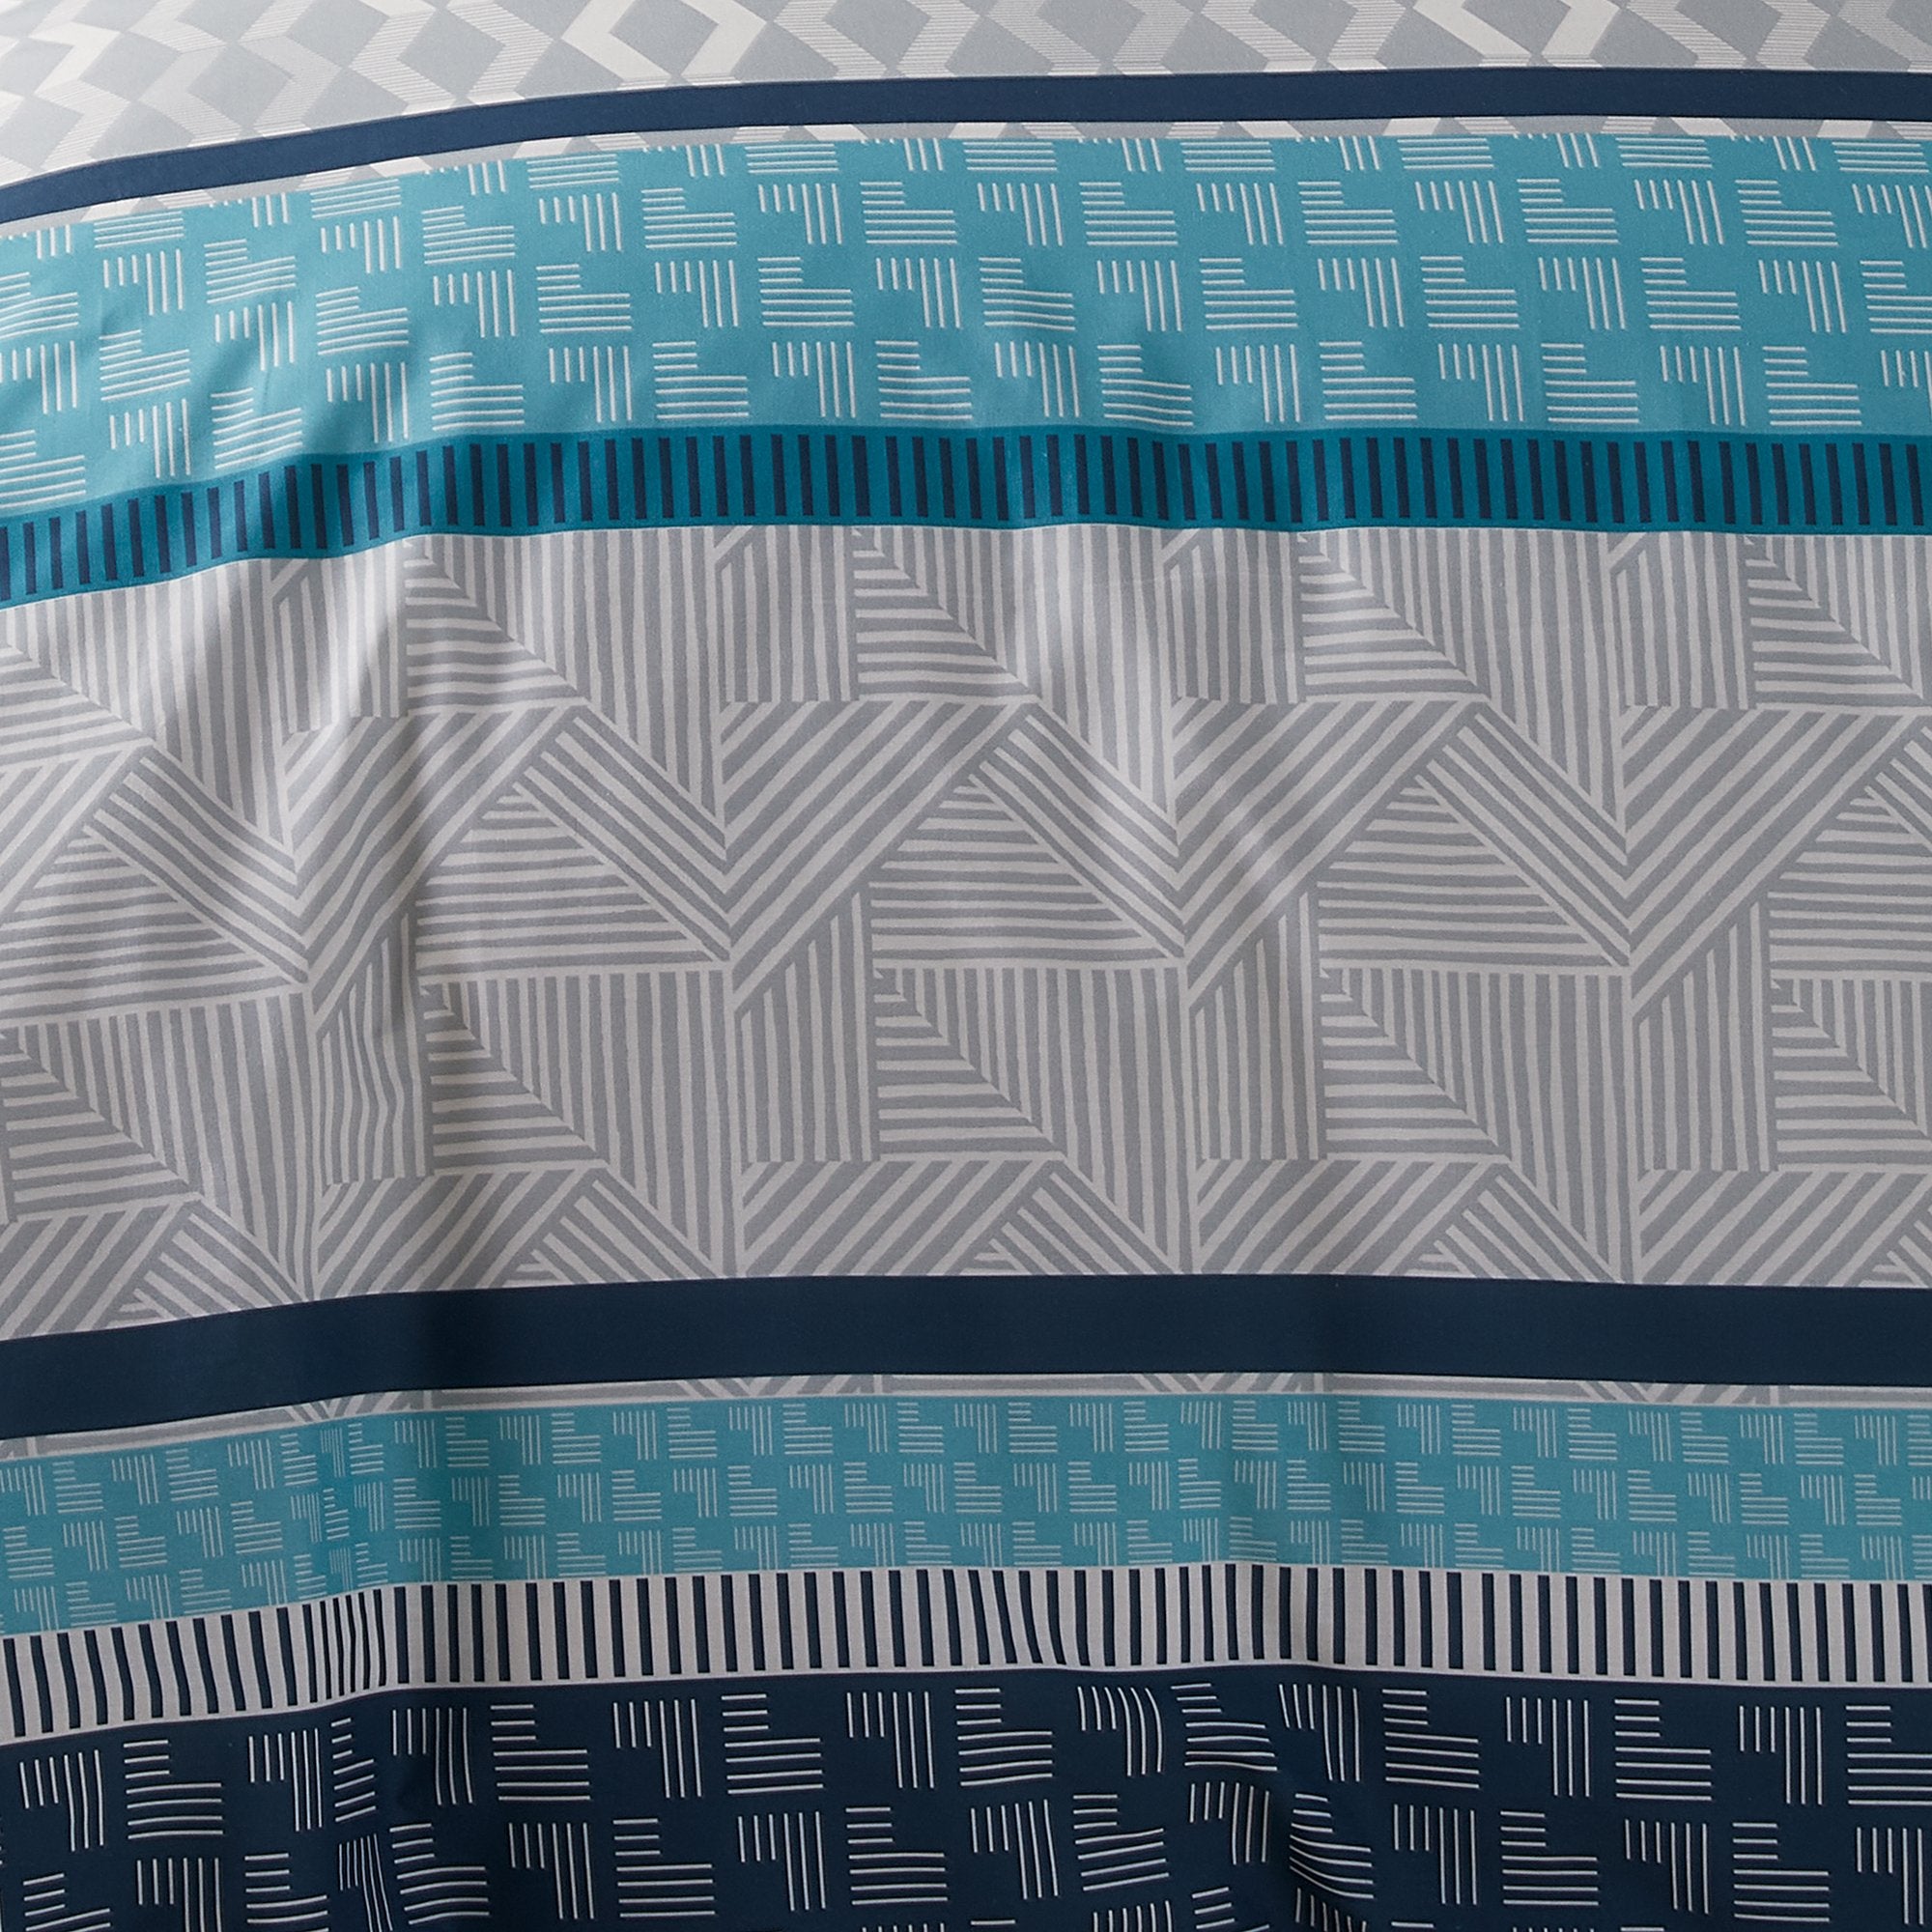 Duvet Cover Set Rico by Fusion in Teal